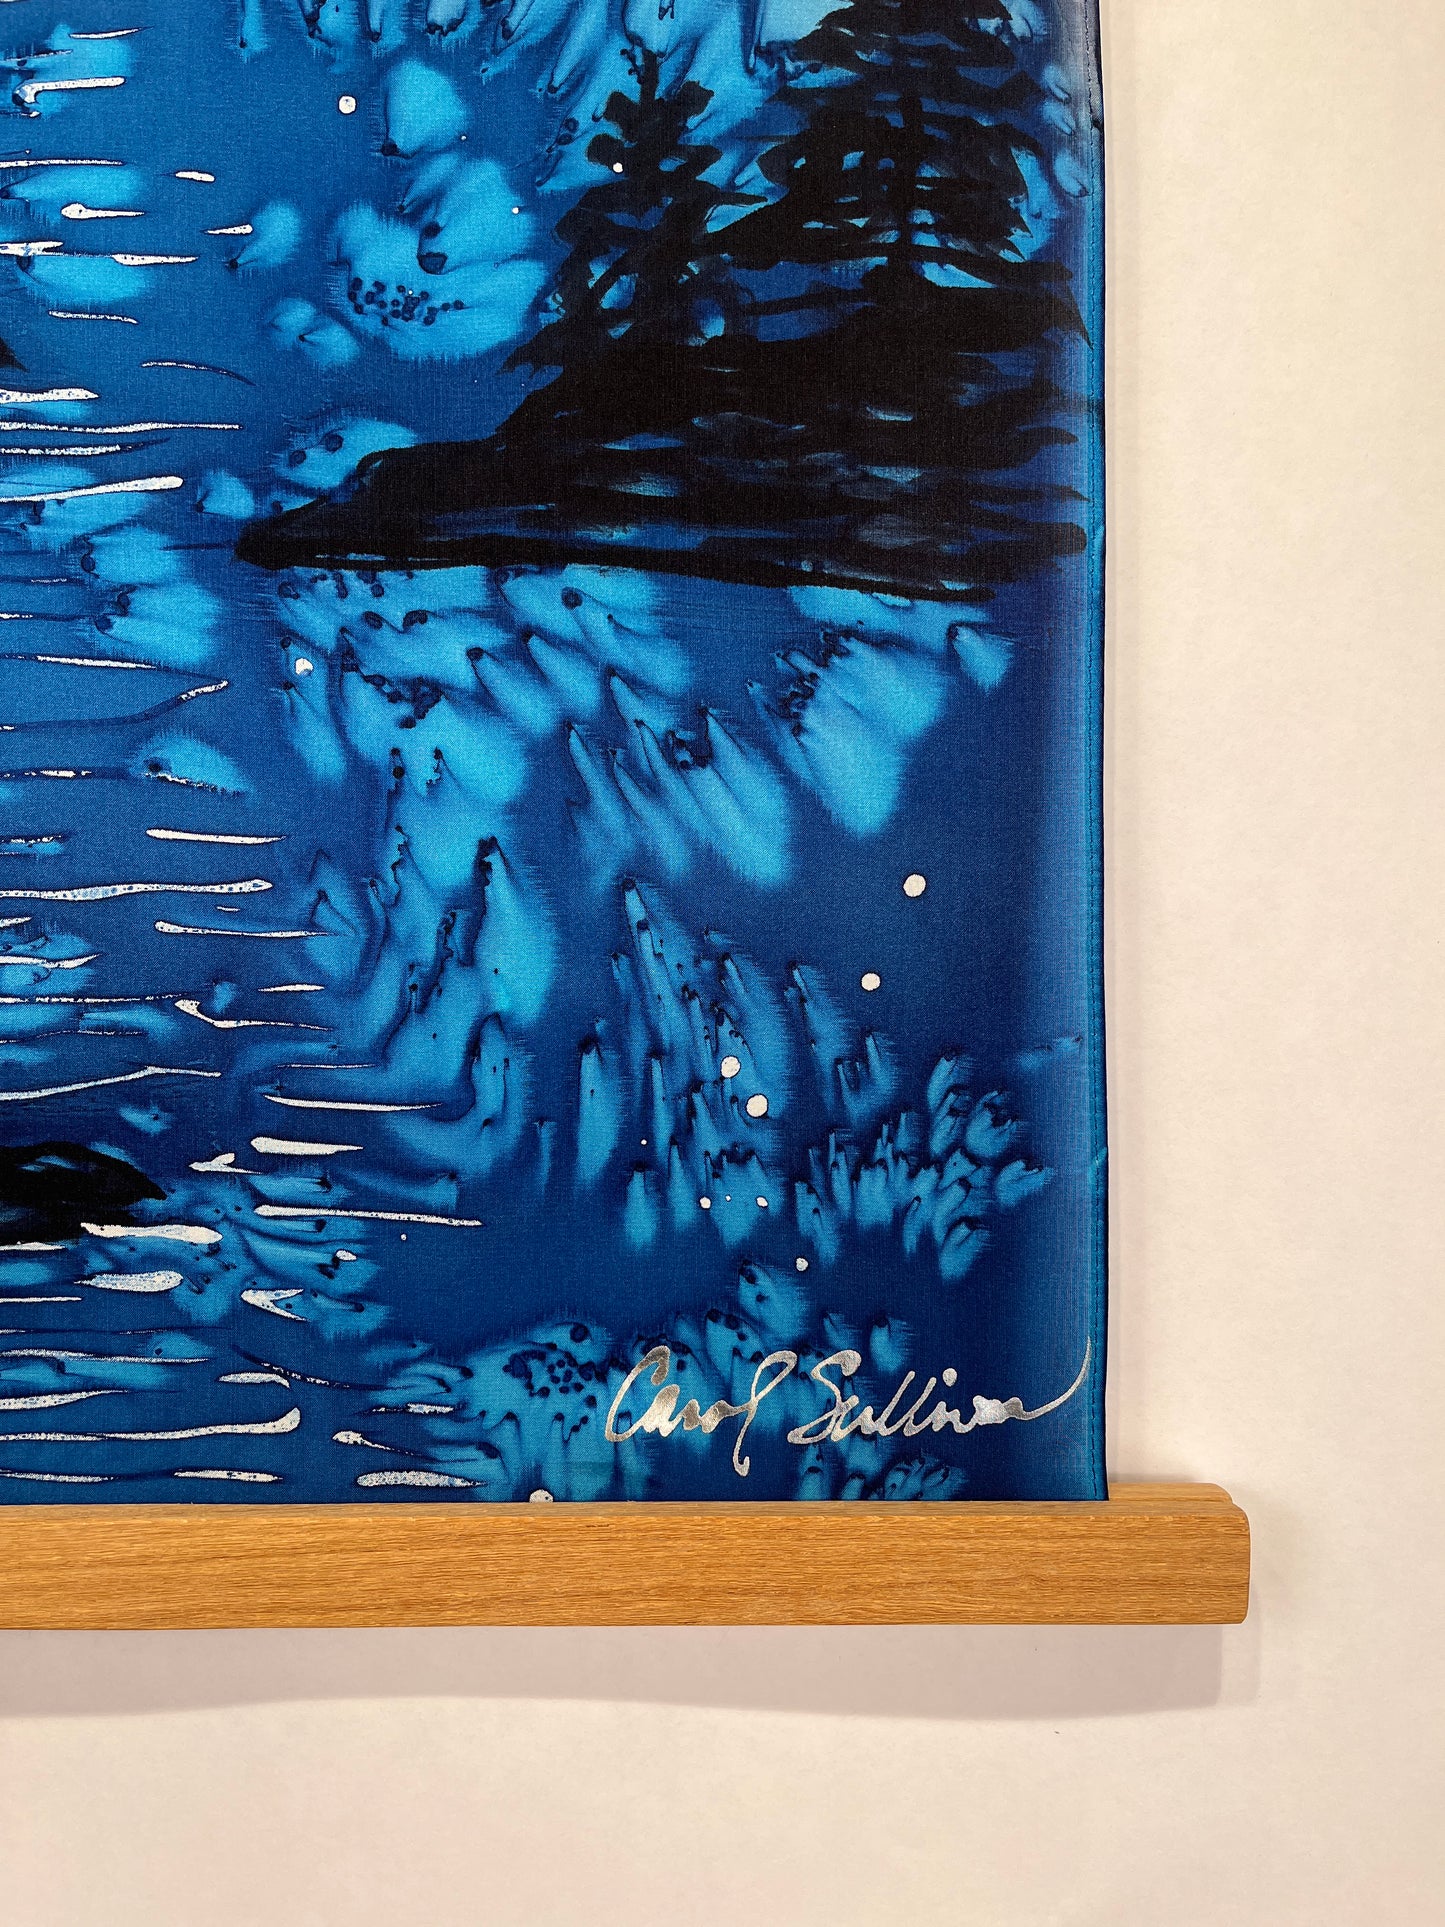 “Evening at the Coast” - Hand-dyed Silk Wall Hanging - $150